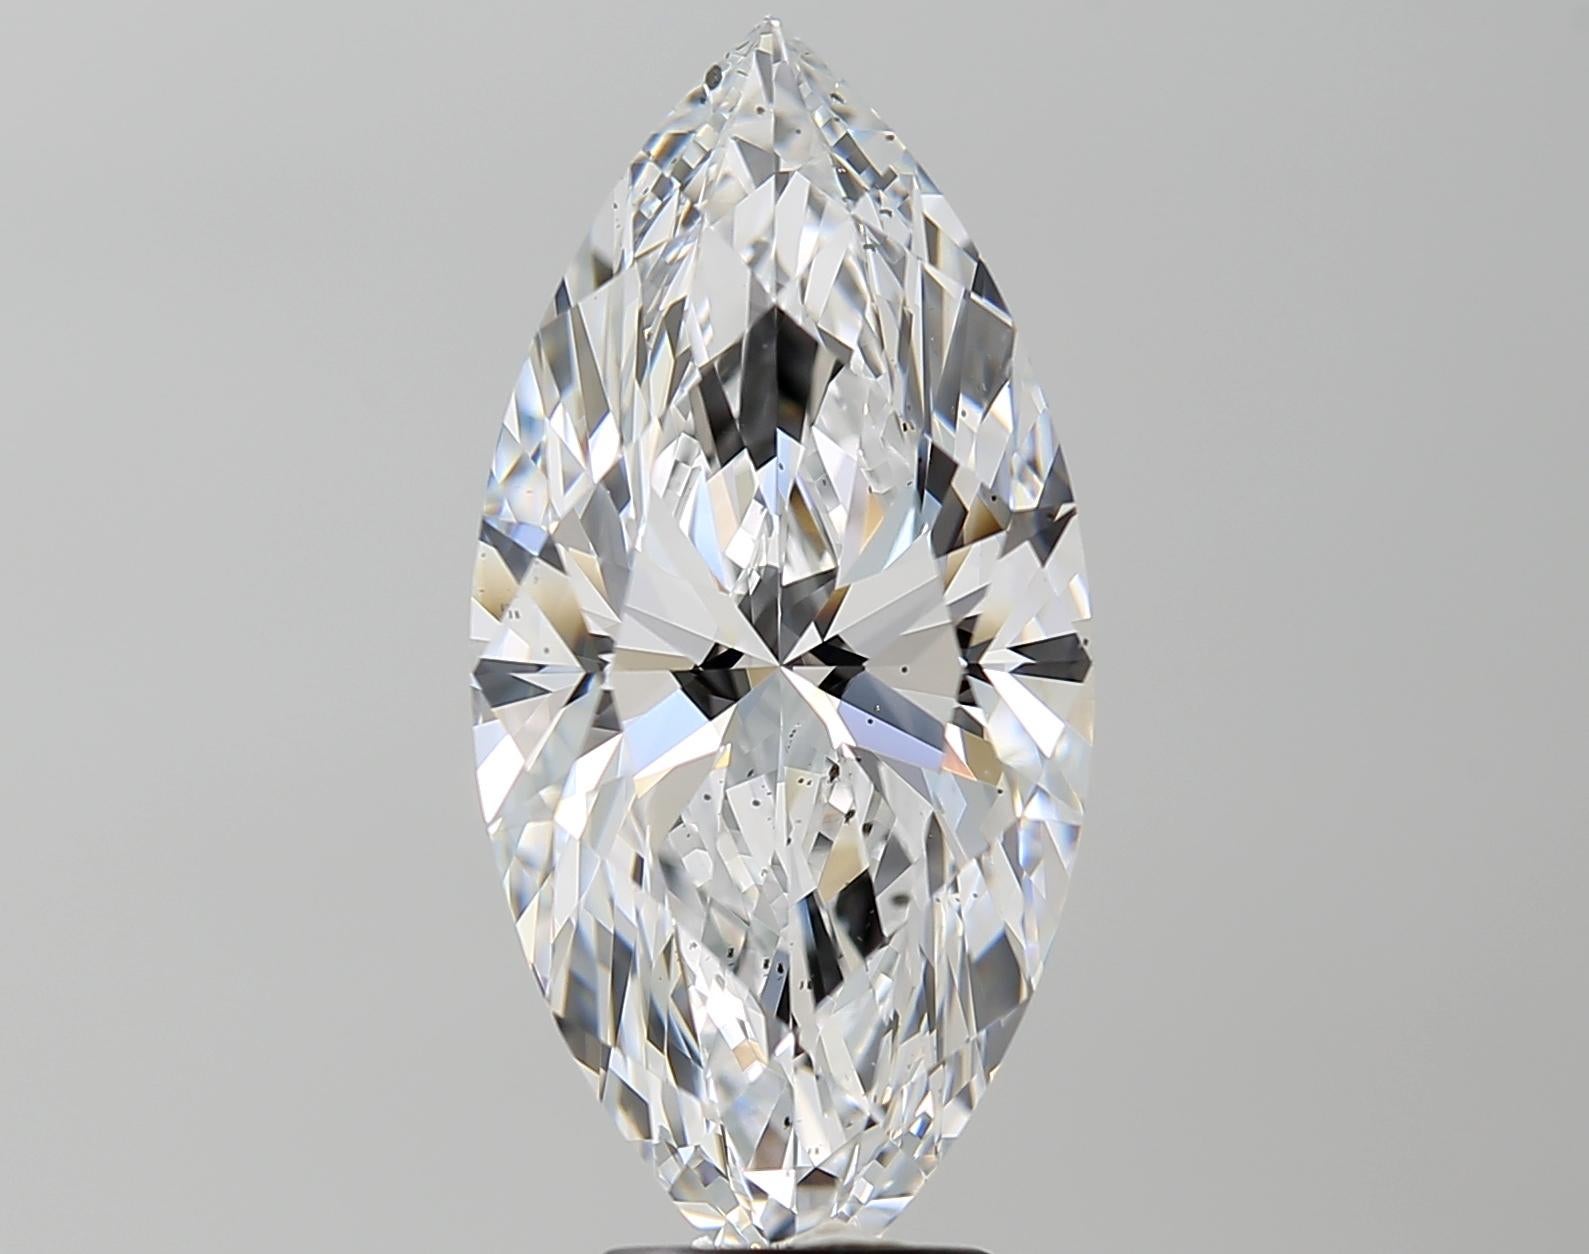 Contemporary Meghna GIA Certified 5.01 Carat D Color Marquise Brilliant Cut Diamond For Sale